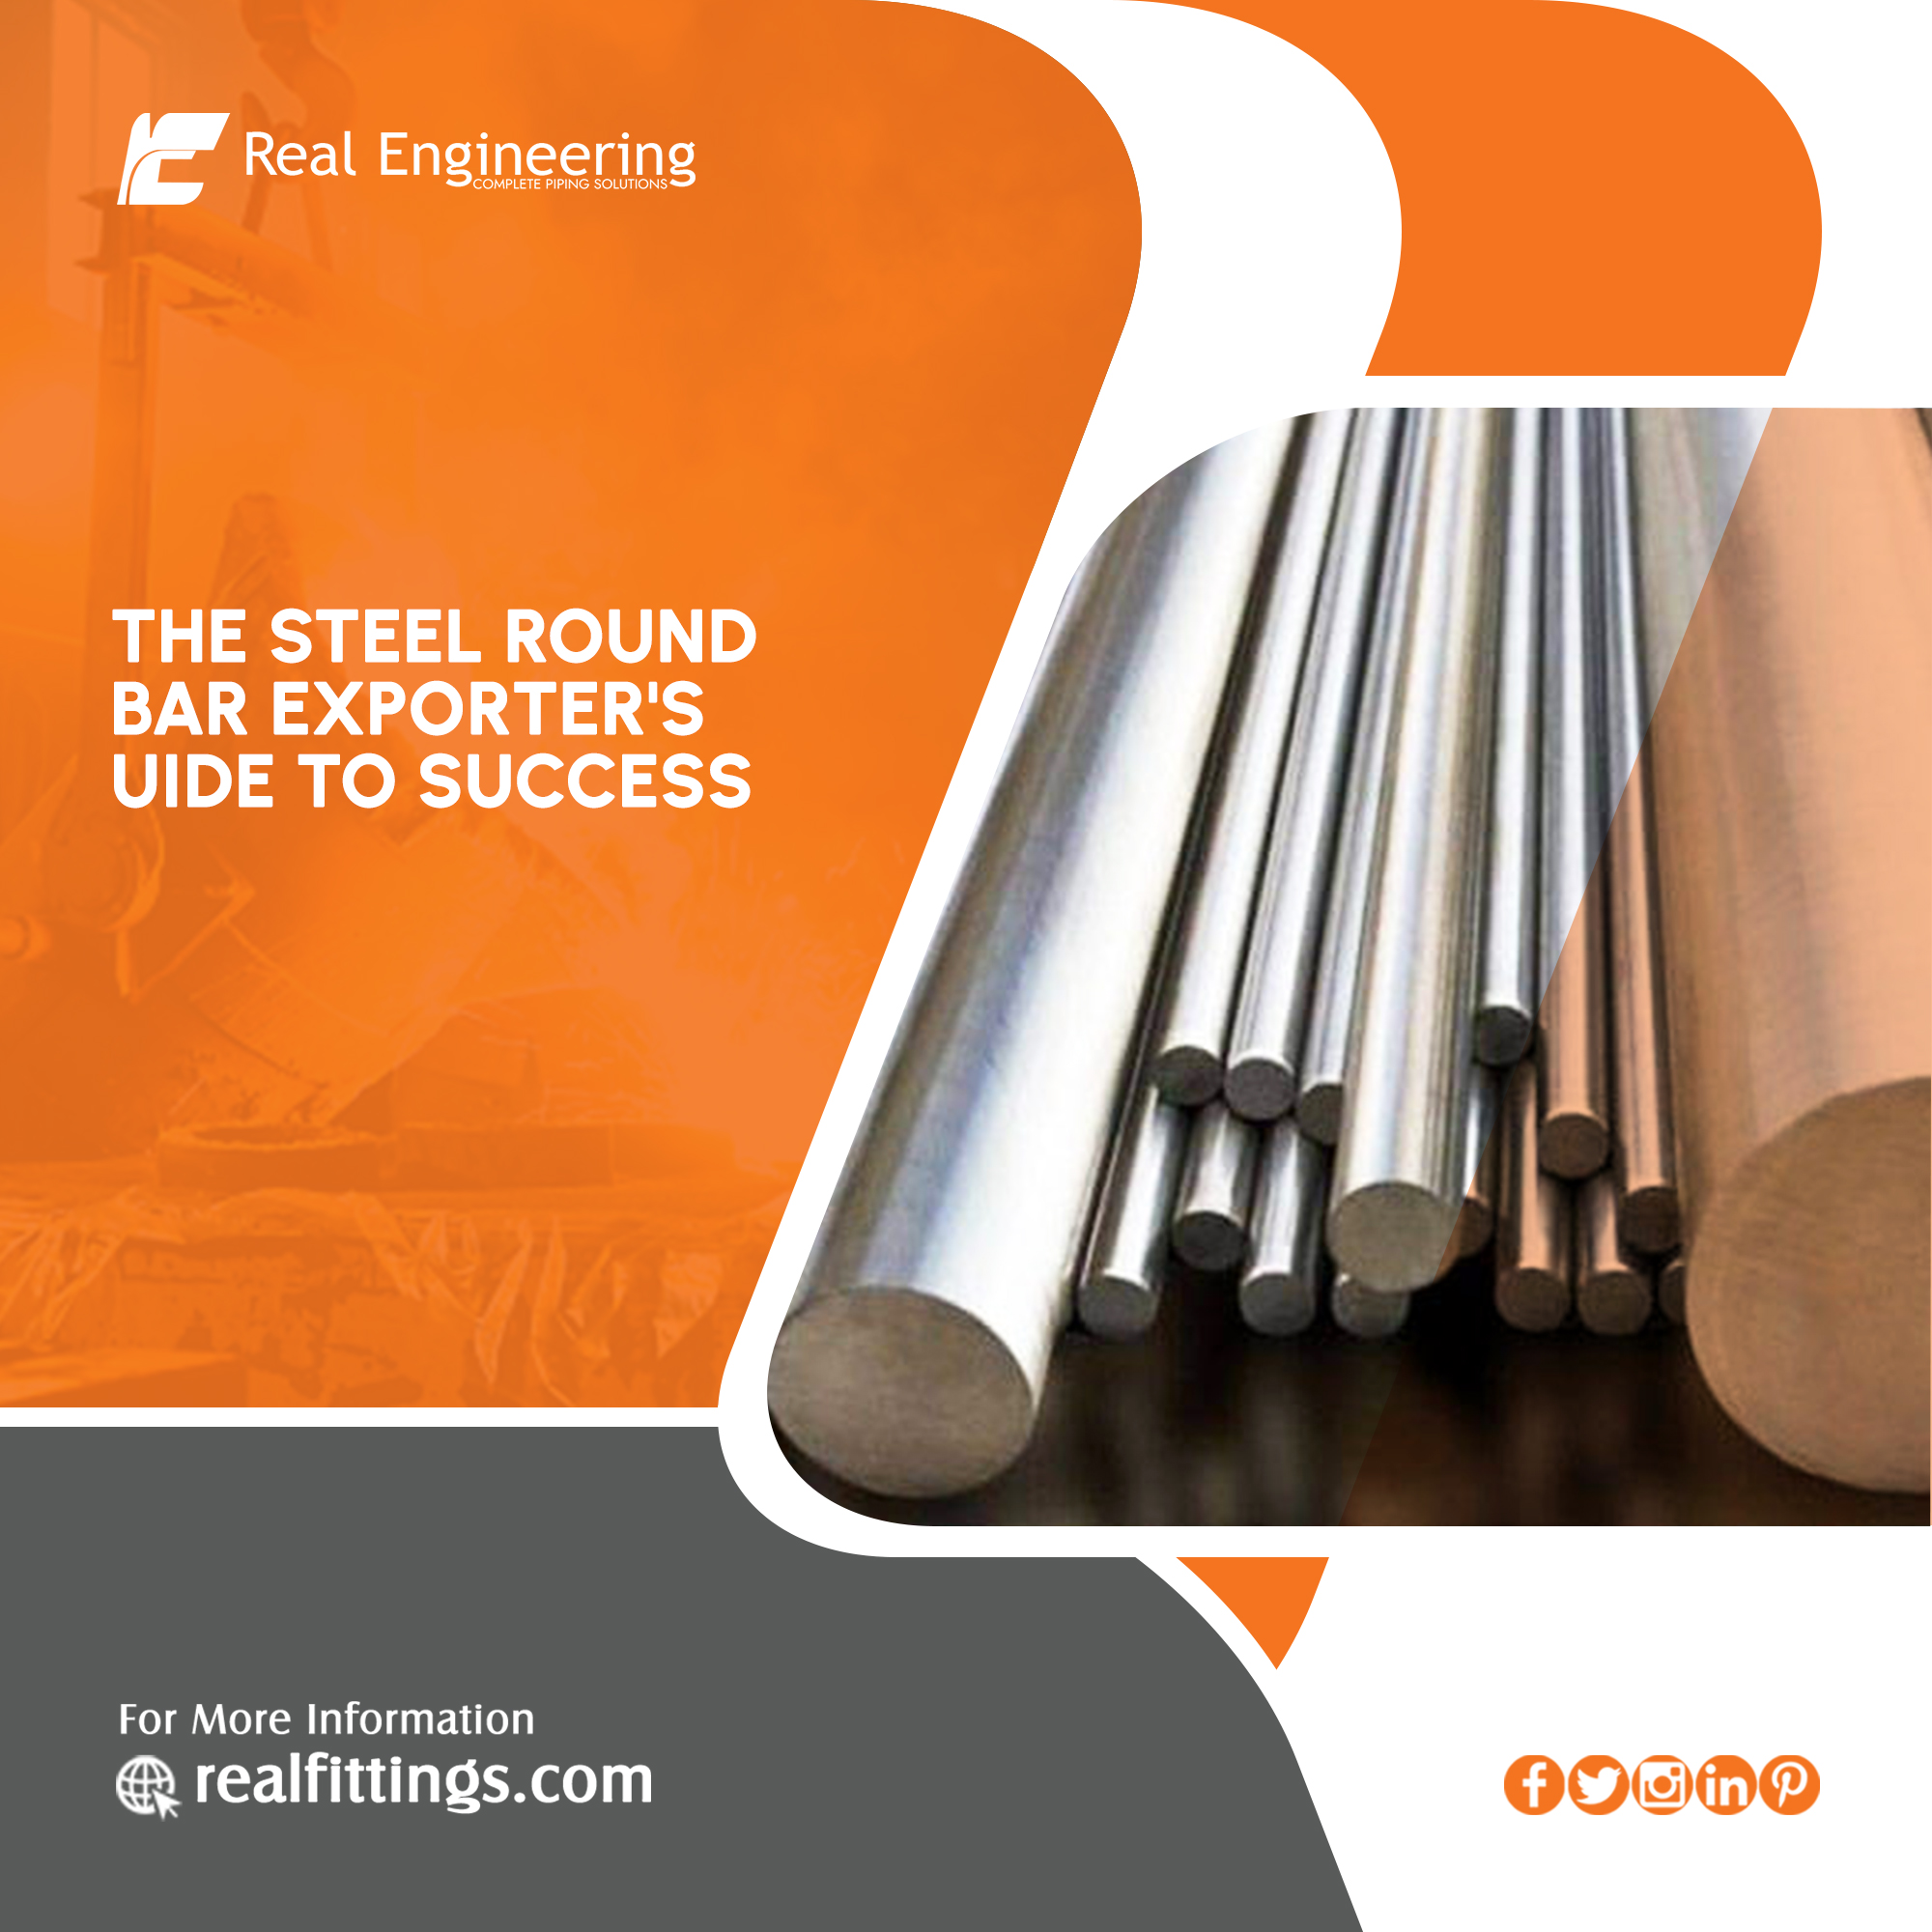 Stainless Steel Round Bar Exporters